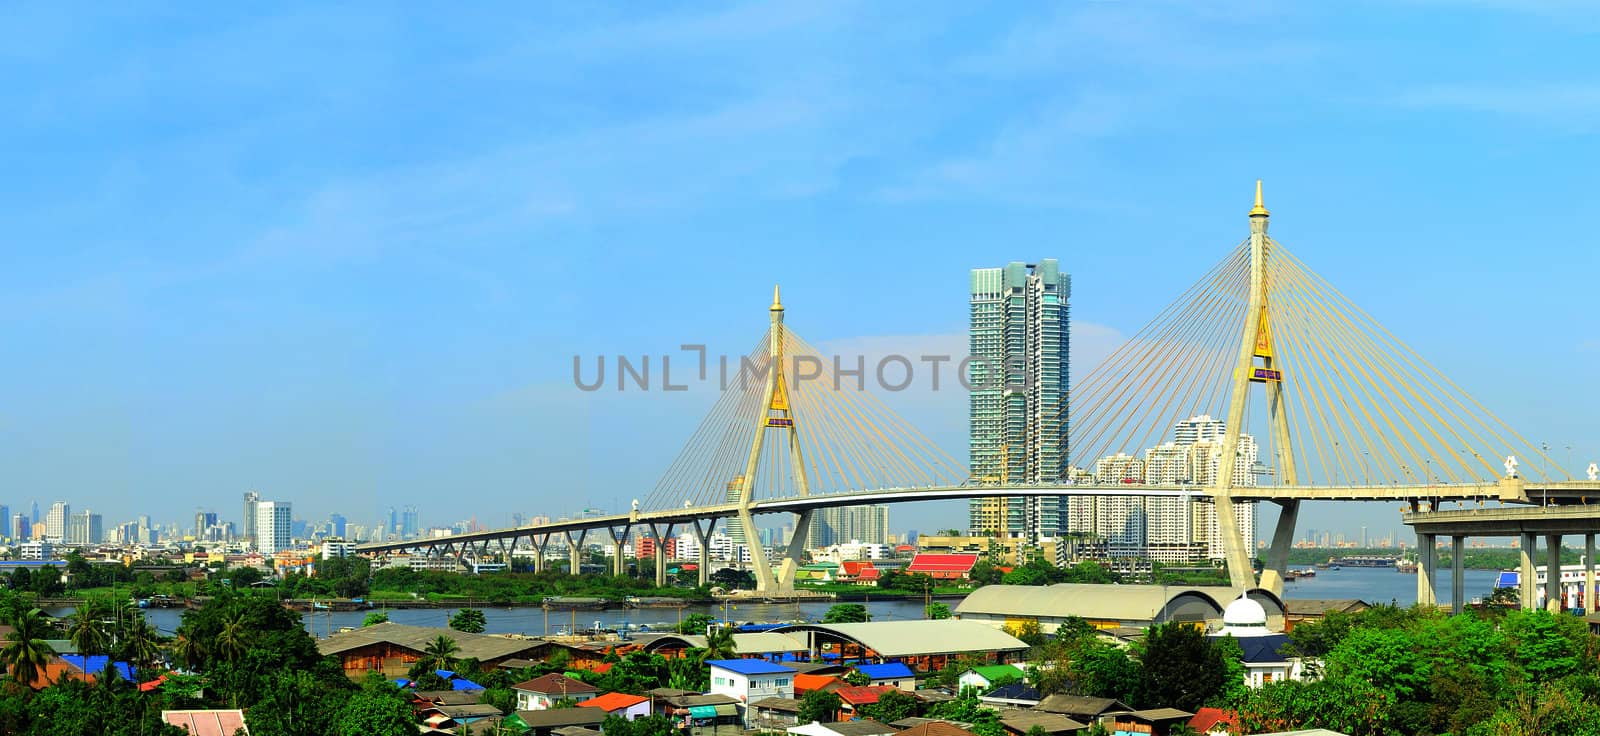 The Bhumibol Bridge also known as the Industrial Ring Road Bridge  is part of the 13 km long Industrial Ring Road connecting southern Bangkok with Samut Prakan Province